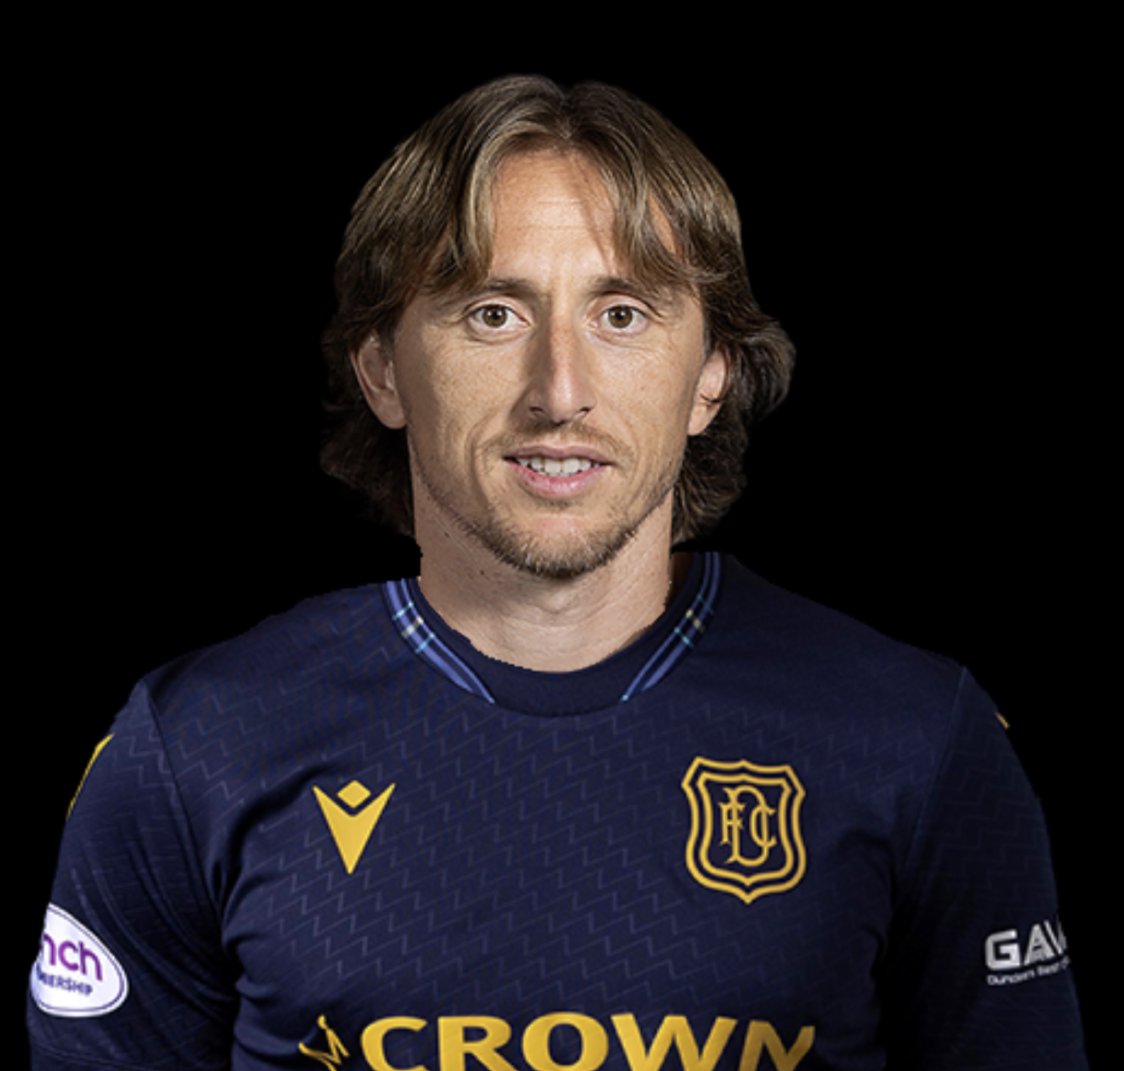 🚨BREAKING NEWS: Luka Modric has NOT ruled out Dundee FC. The Scottish Club is rumoured to have made a contract offer of £50 and a Pie of his choice every week. Modric is yet to deny the rumors. 🇭🇷🏴󠁧󠁢󠁳󠁣󠁴󠁿